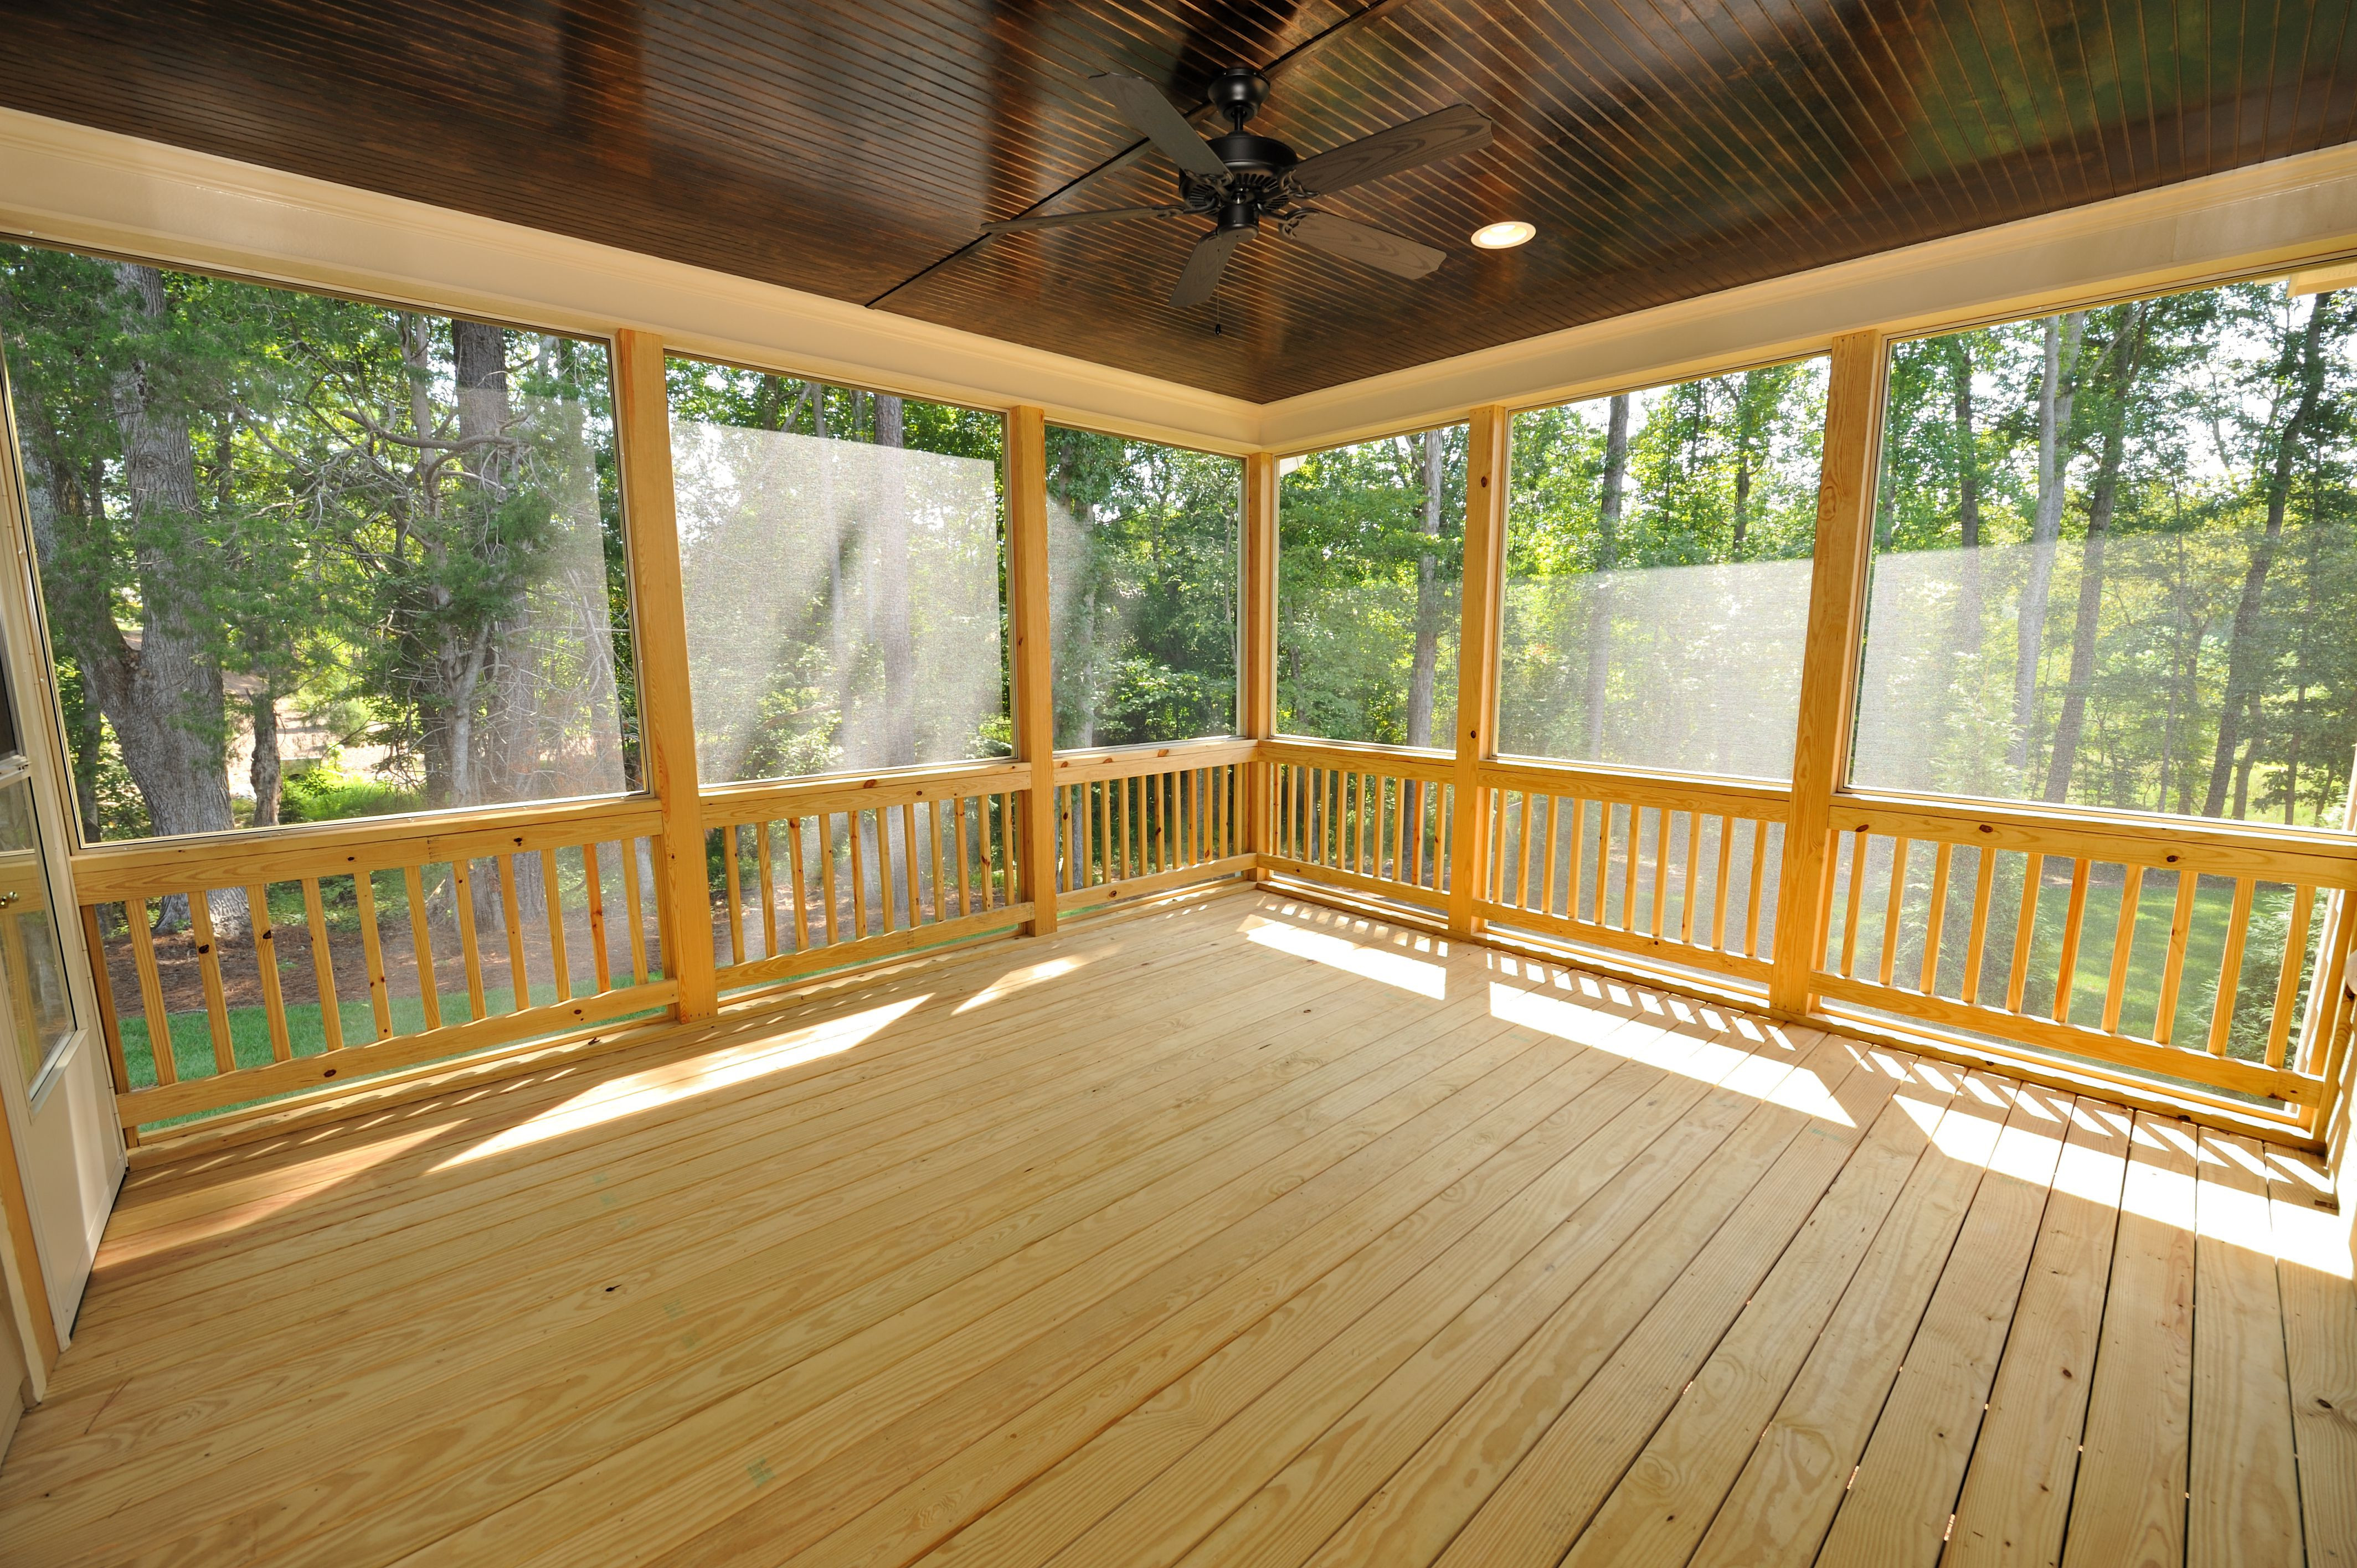 16 Ideal Teak and Hardwood Floors Reno Nv 2024 free download teak and hardwood floors reno nv of great outdoor deck design ideas and inspiration for gettyimages 157649260 5788aa0b5f9b584d206e8c46